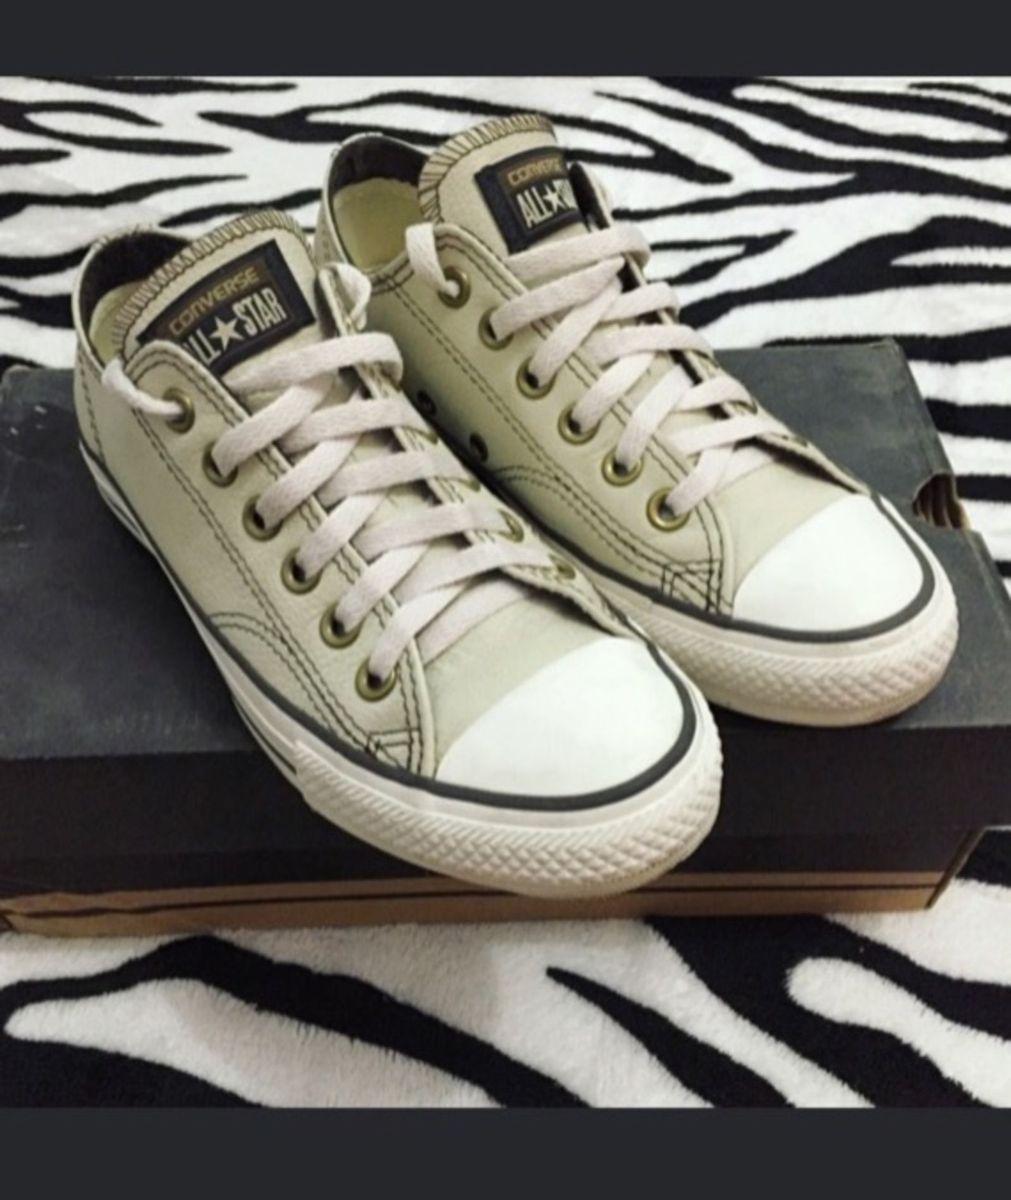 all star converse couro bege